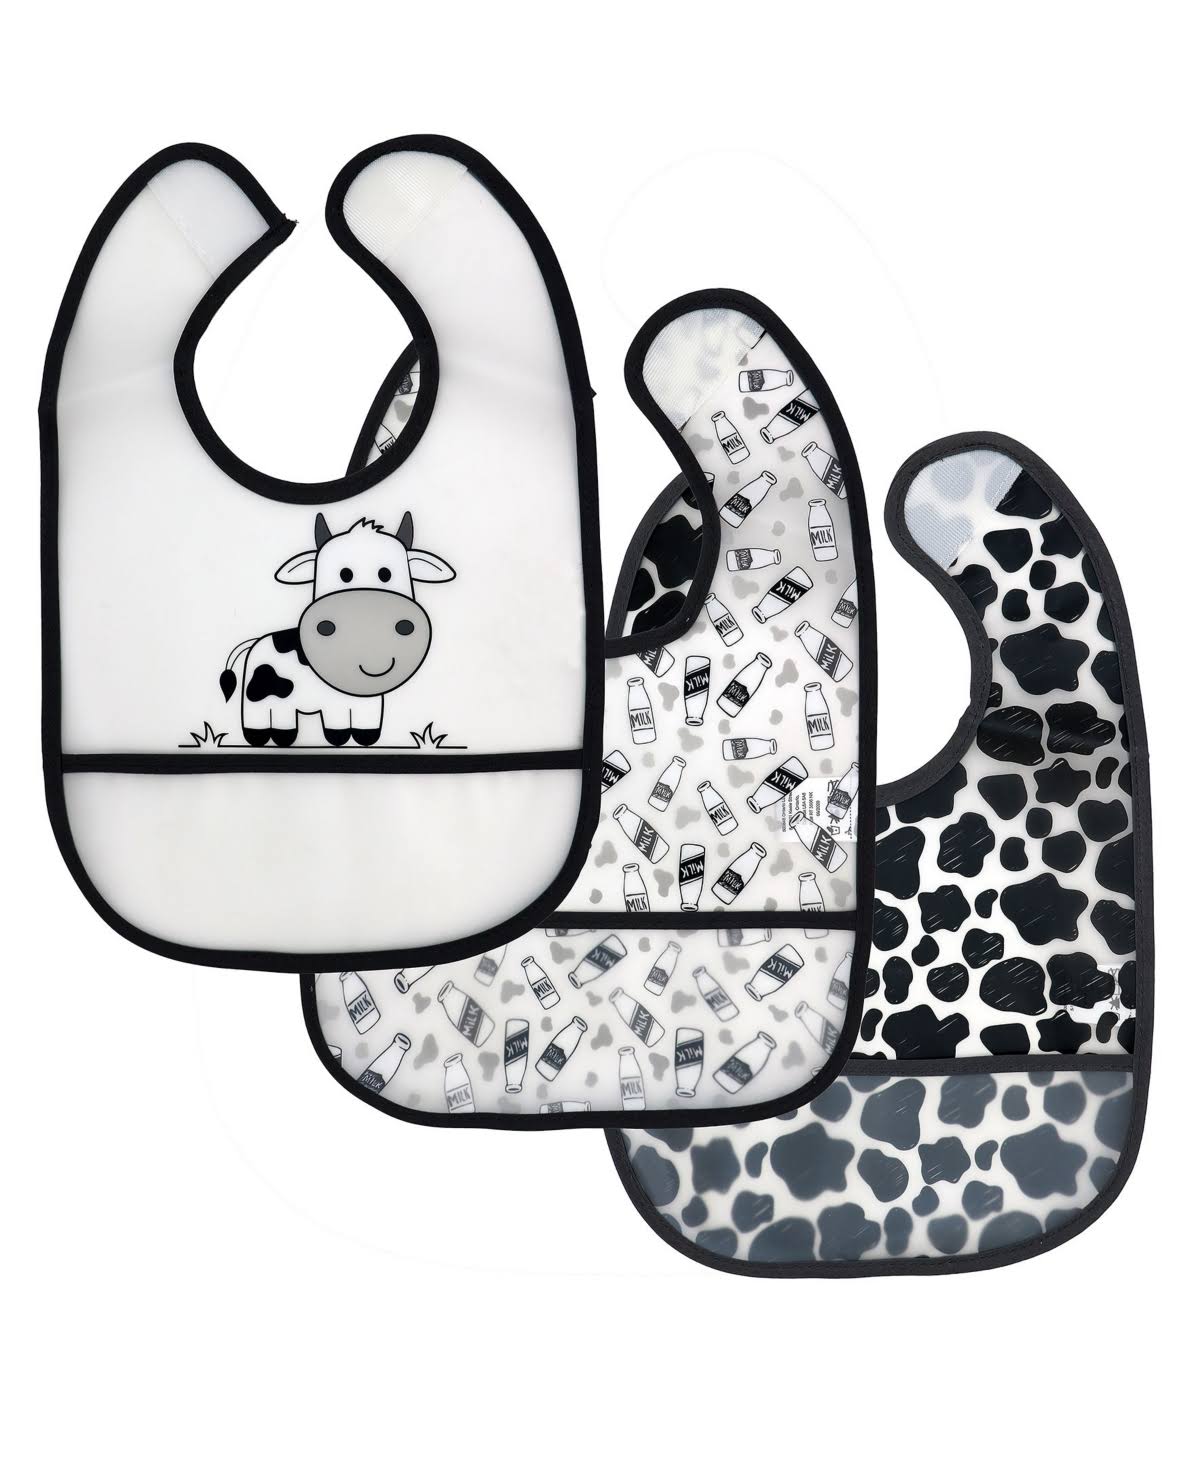 Baby Girls and Boys Cow Bibs Set, Pack of 3 - Gray - Size 0-12 Months